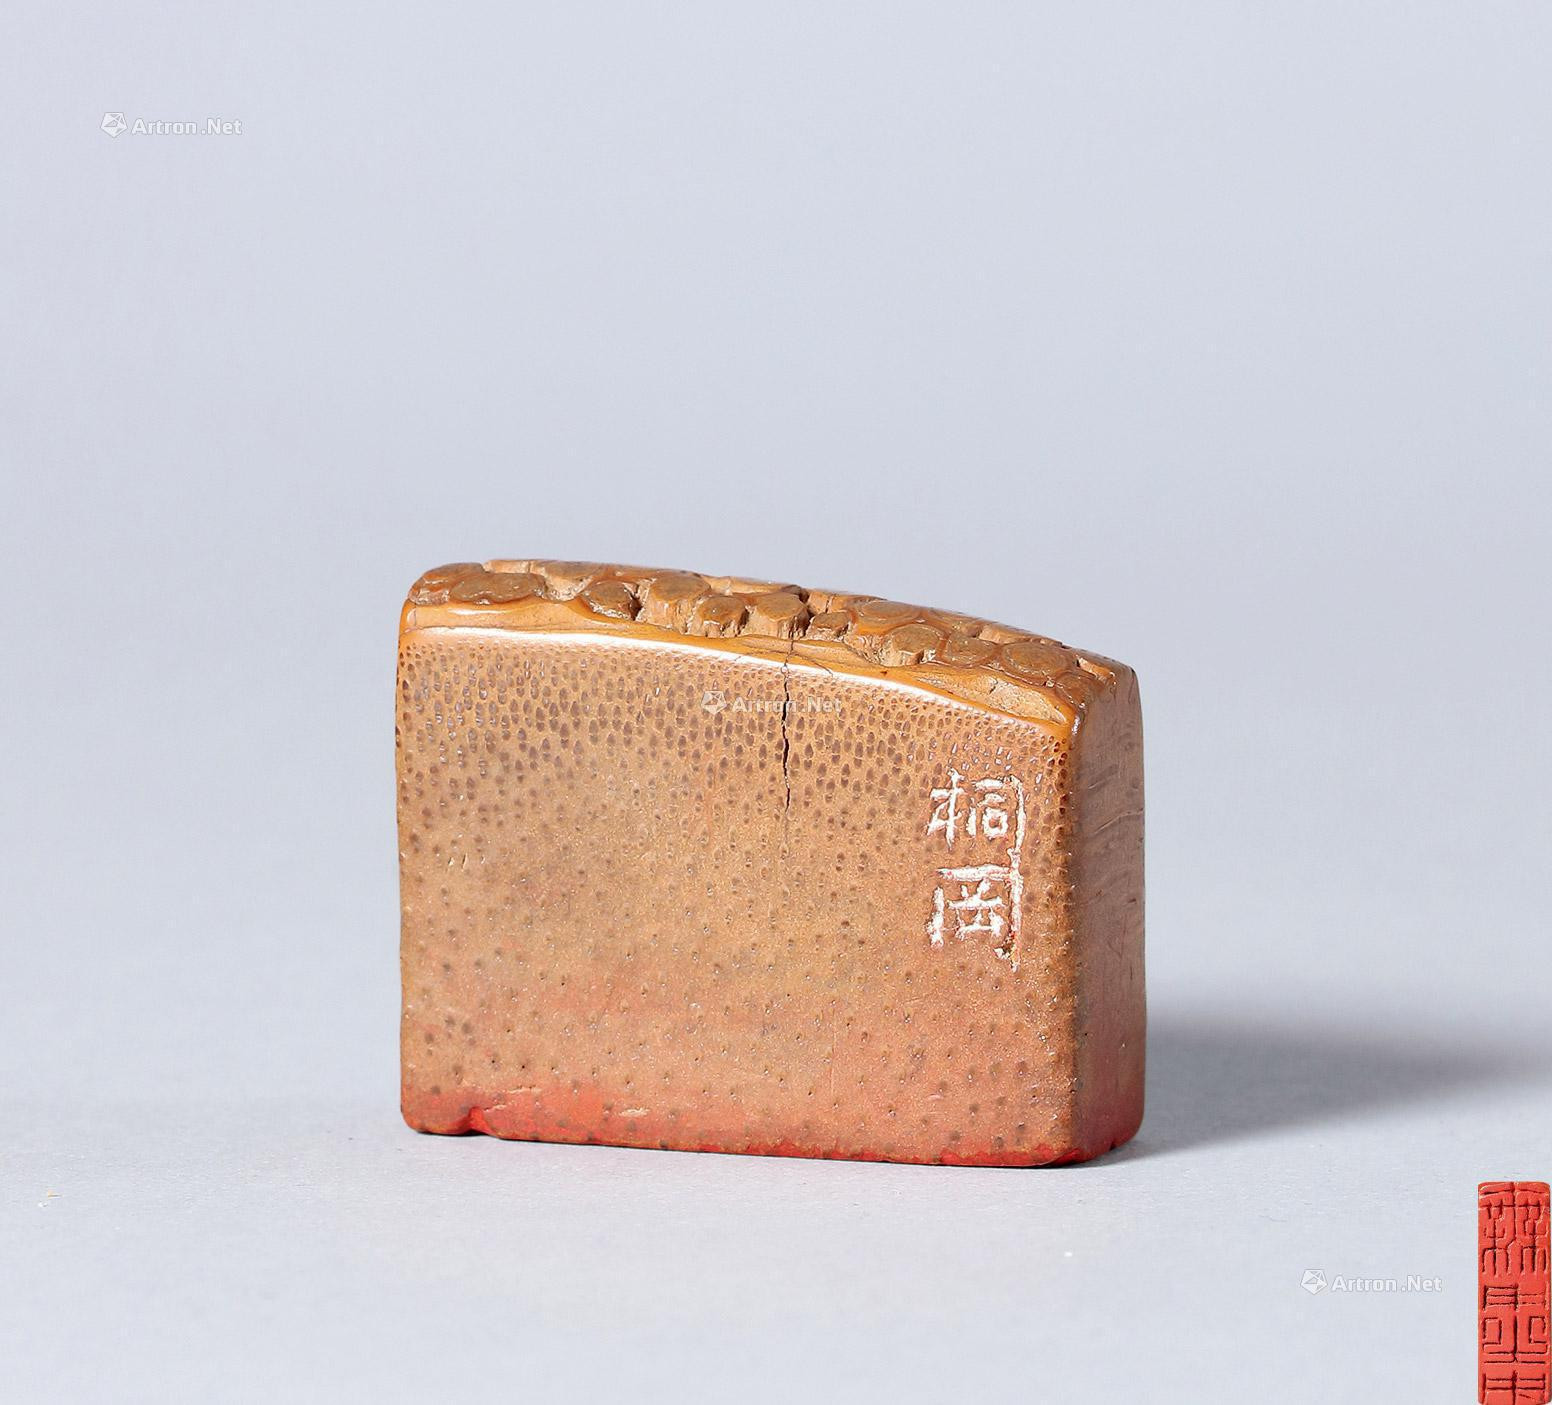 BAMBOO ROOT CARVED RECTANGULAR SEAL INSCRIBED BY PAN XIFENG